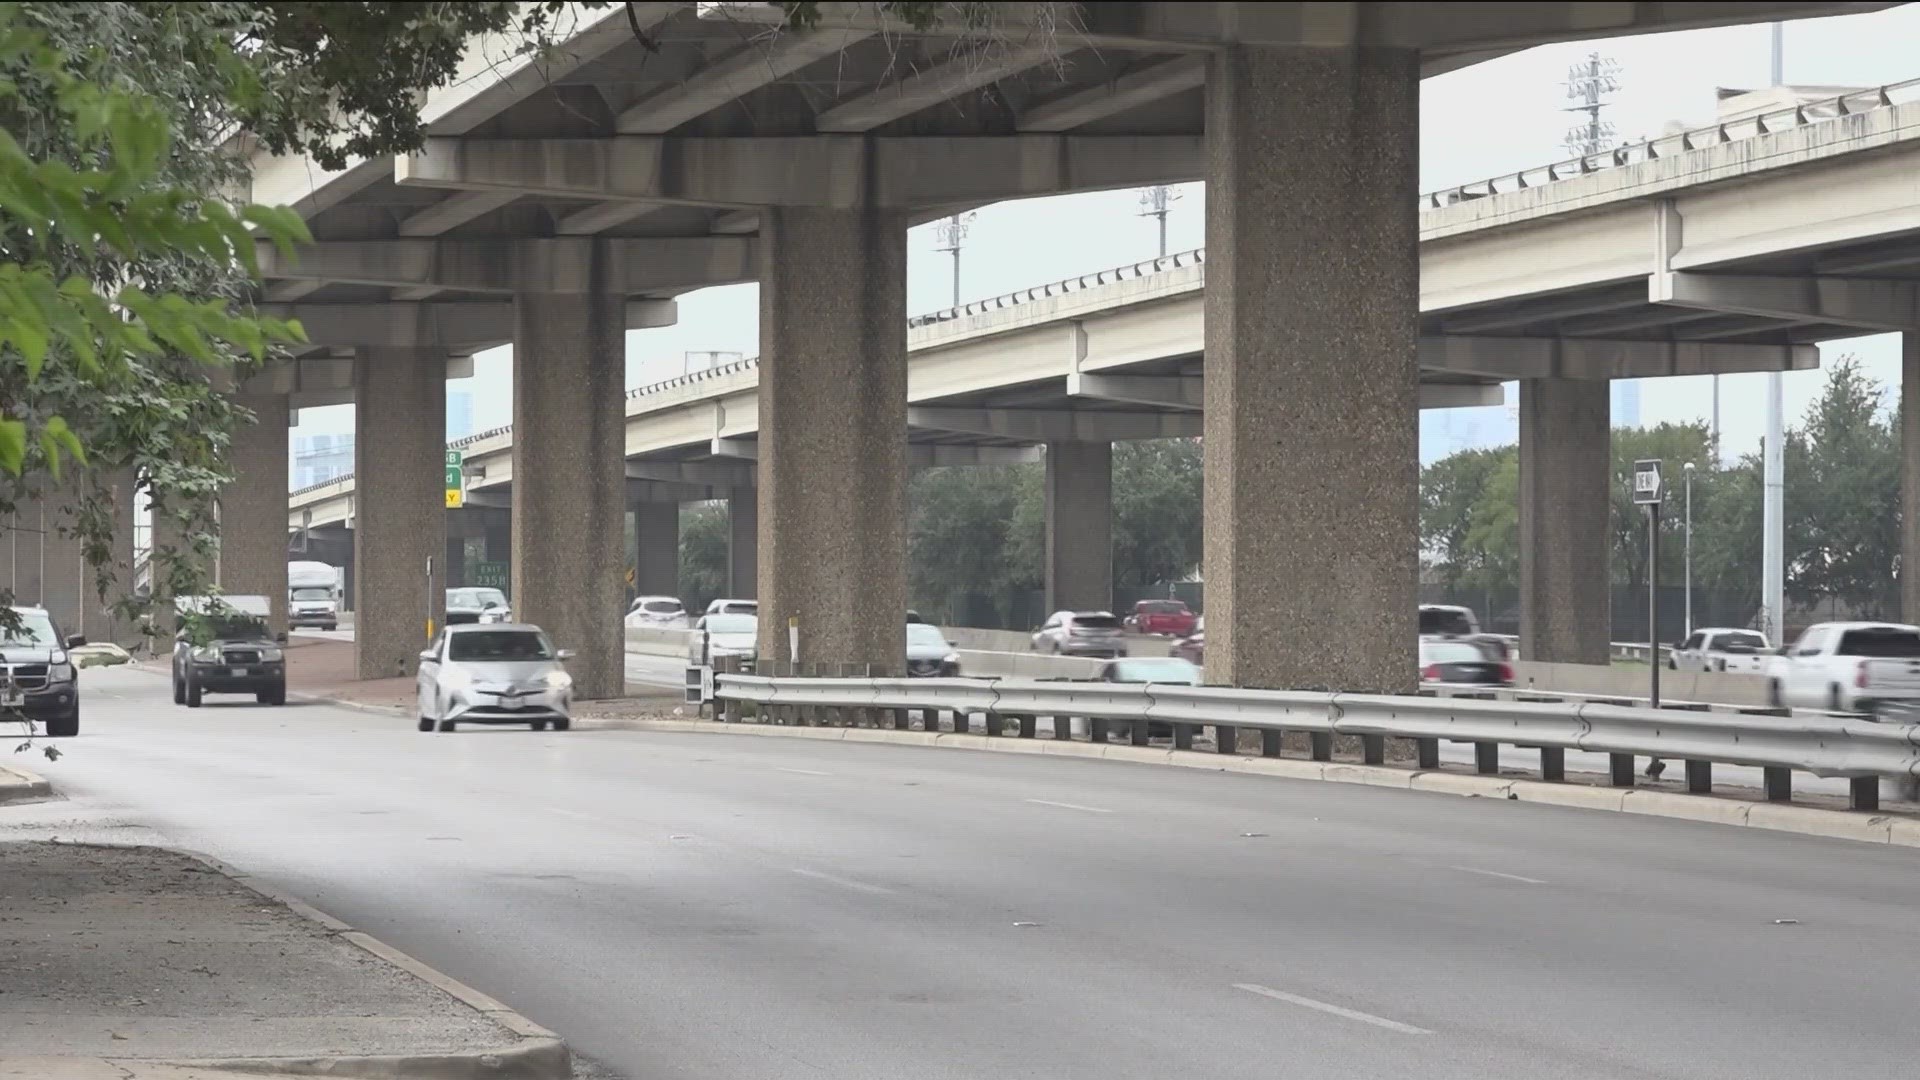 TxDOT is working to accommodate business and property owners who will have to move for the I-35 expansion project.